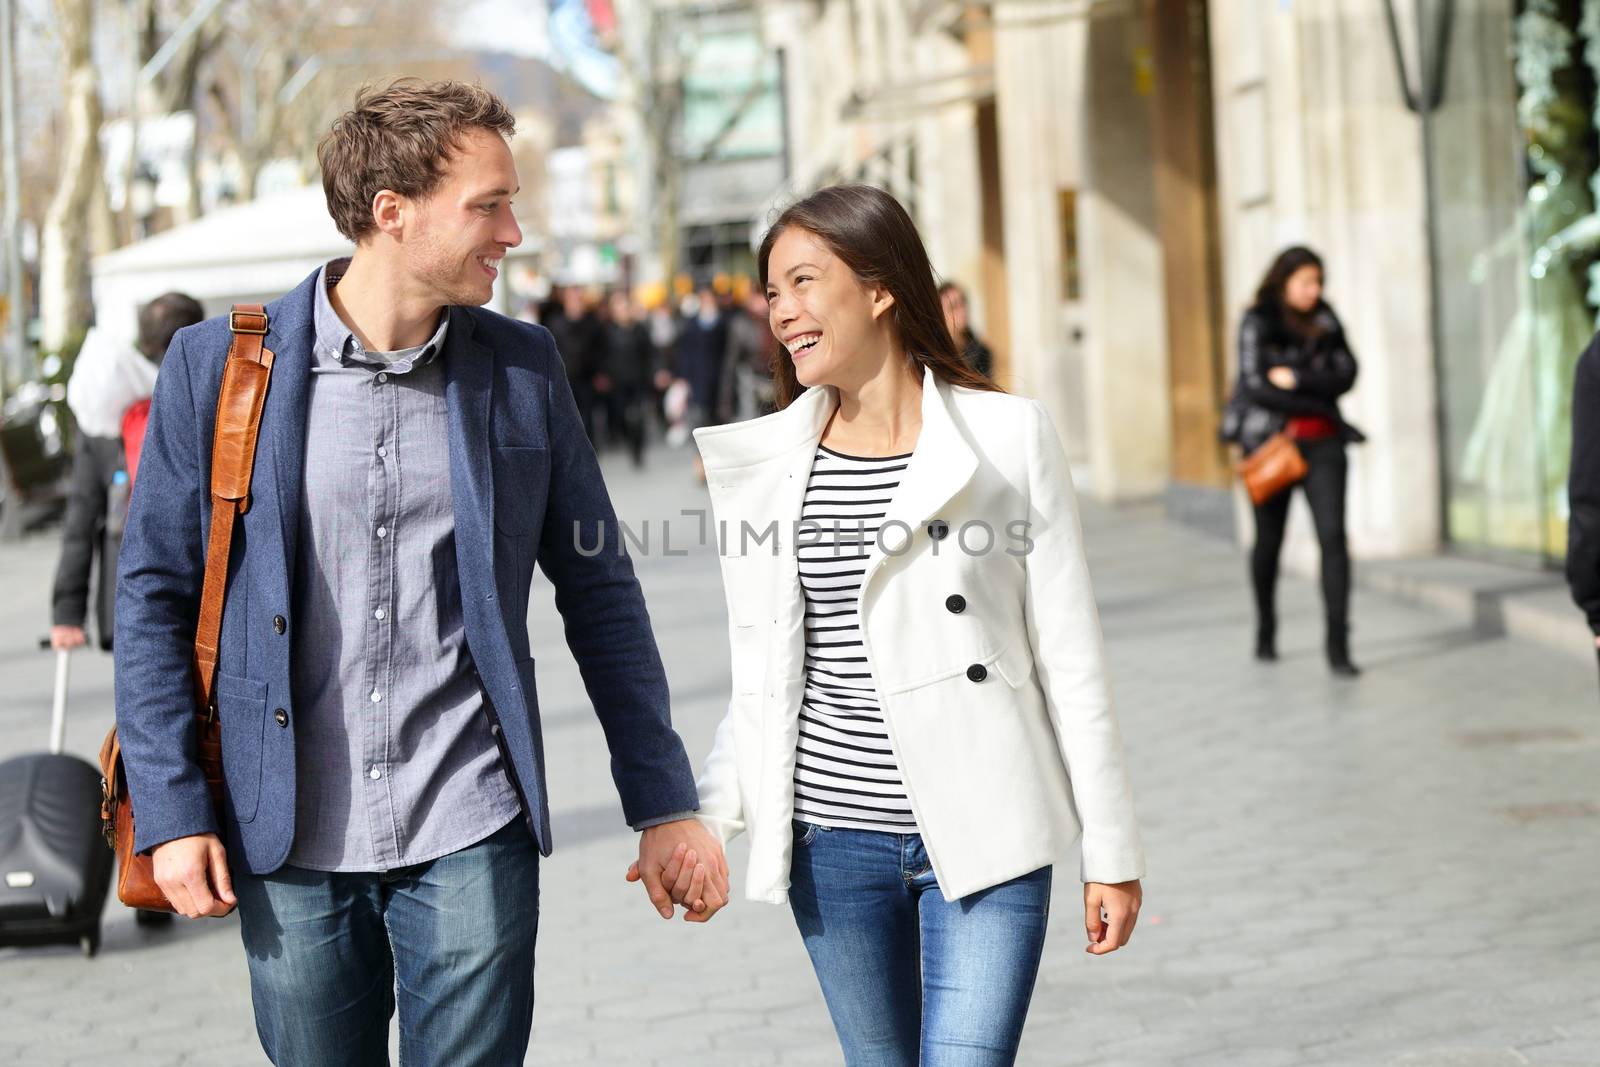 Urban modern professionals couple walking romantic laughing talking holding hands on date. Young multicultural couple Asian and Caucasian. From famous Passeig de Gracia, Barcelona, Catalonia, Spain.